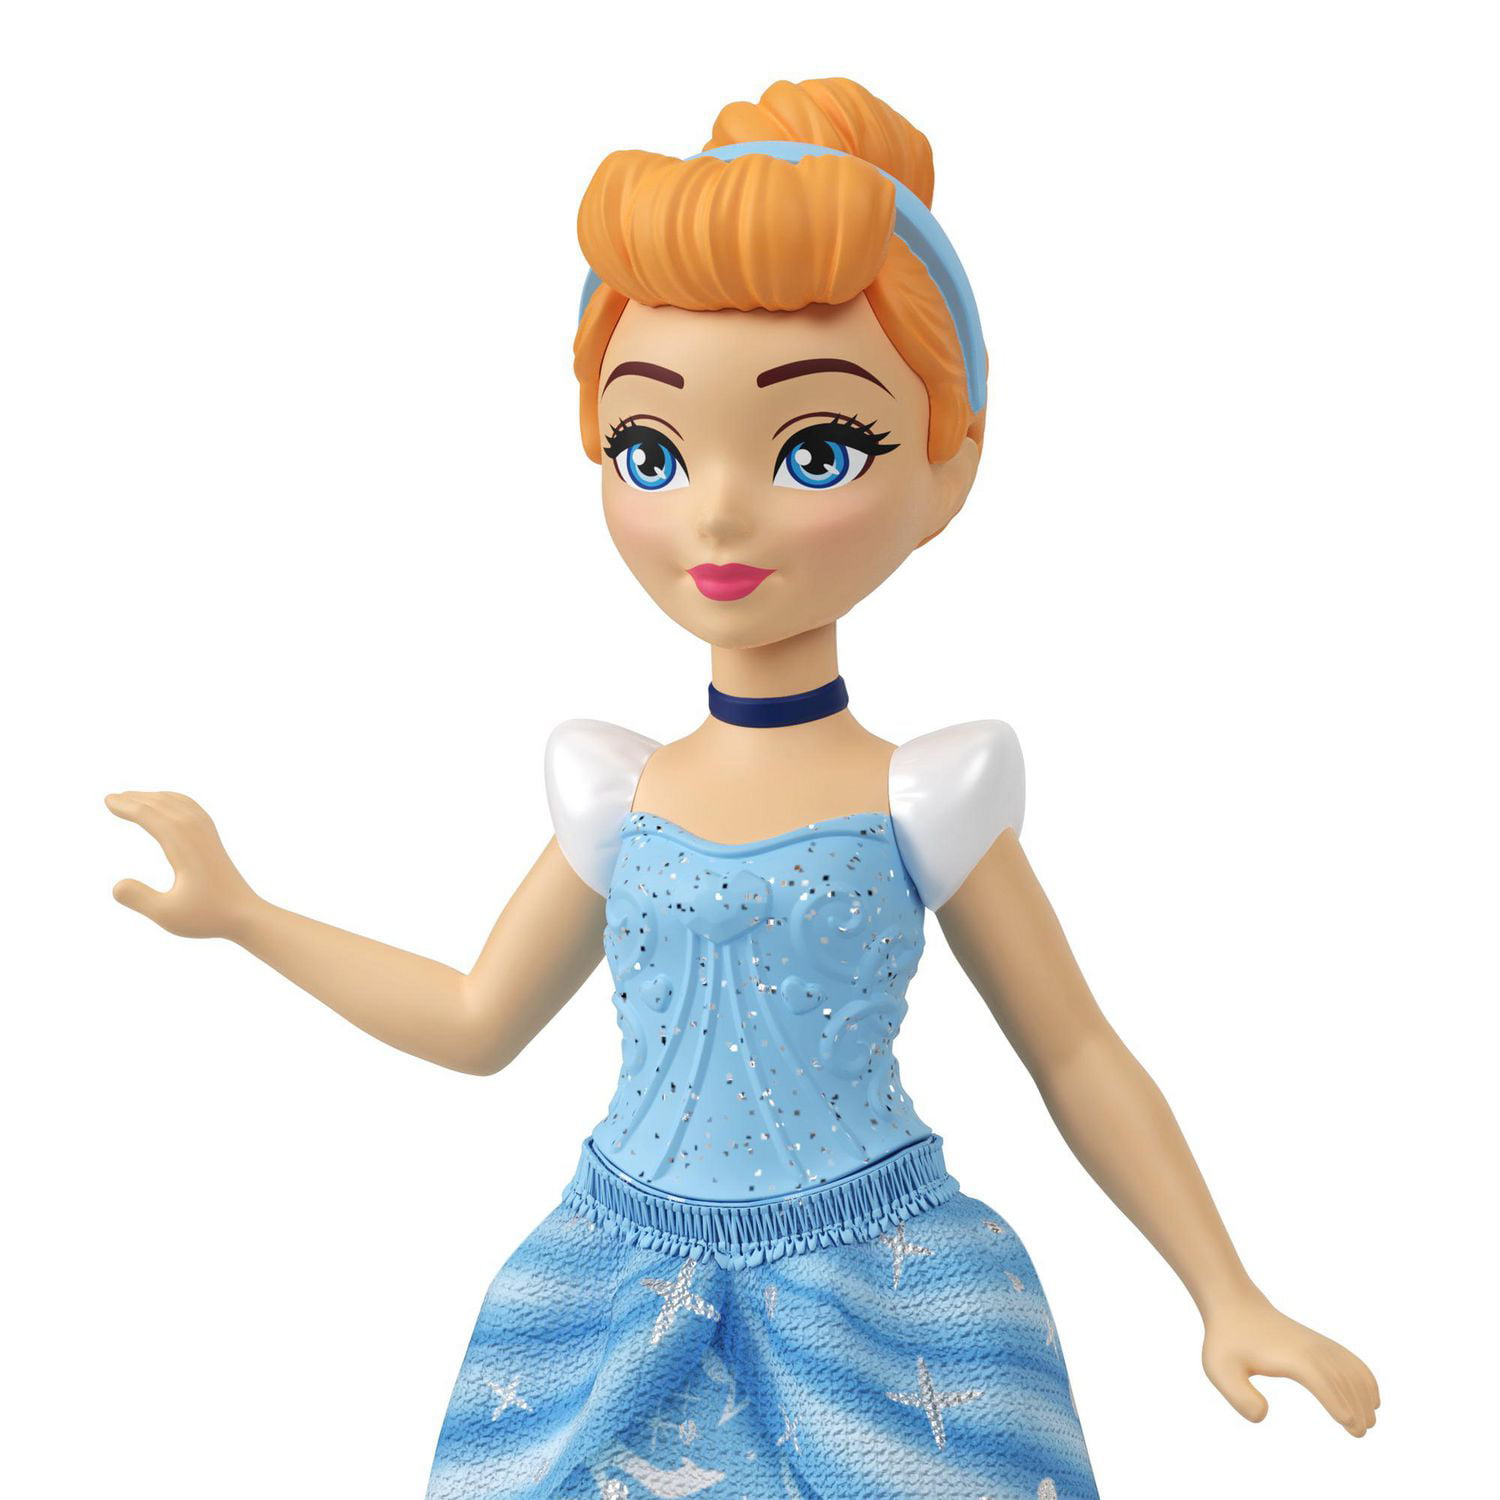 Disney Learning: Cinderella: Time for Magic! (Novelty)